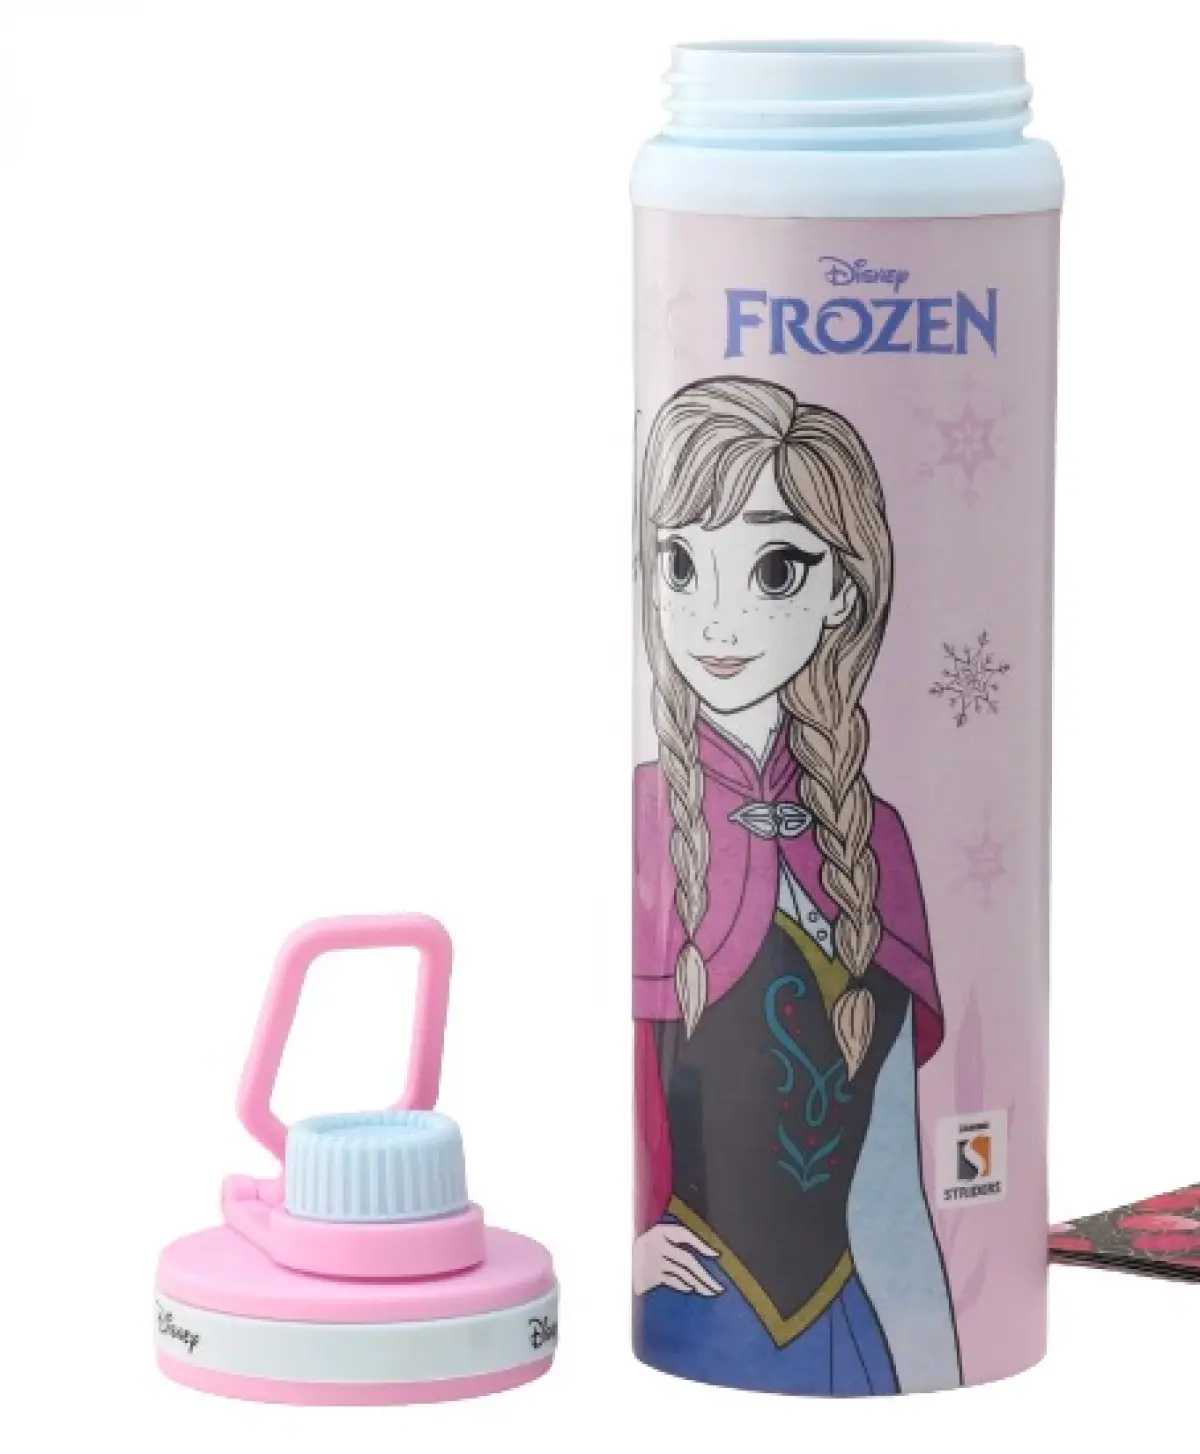 Striders Magic Ice Adventure Frozen Sipper Bottle 700ml Fun & Hydration For Kids Ages 3Y+